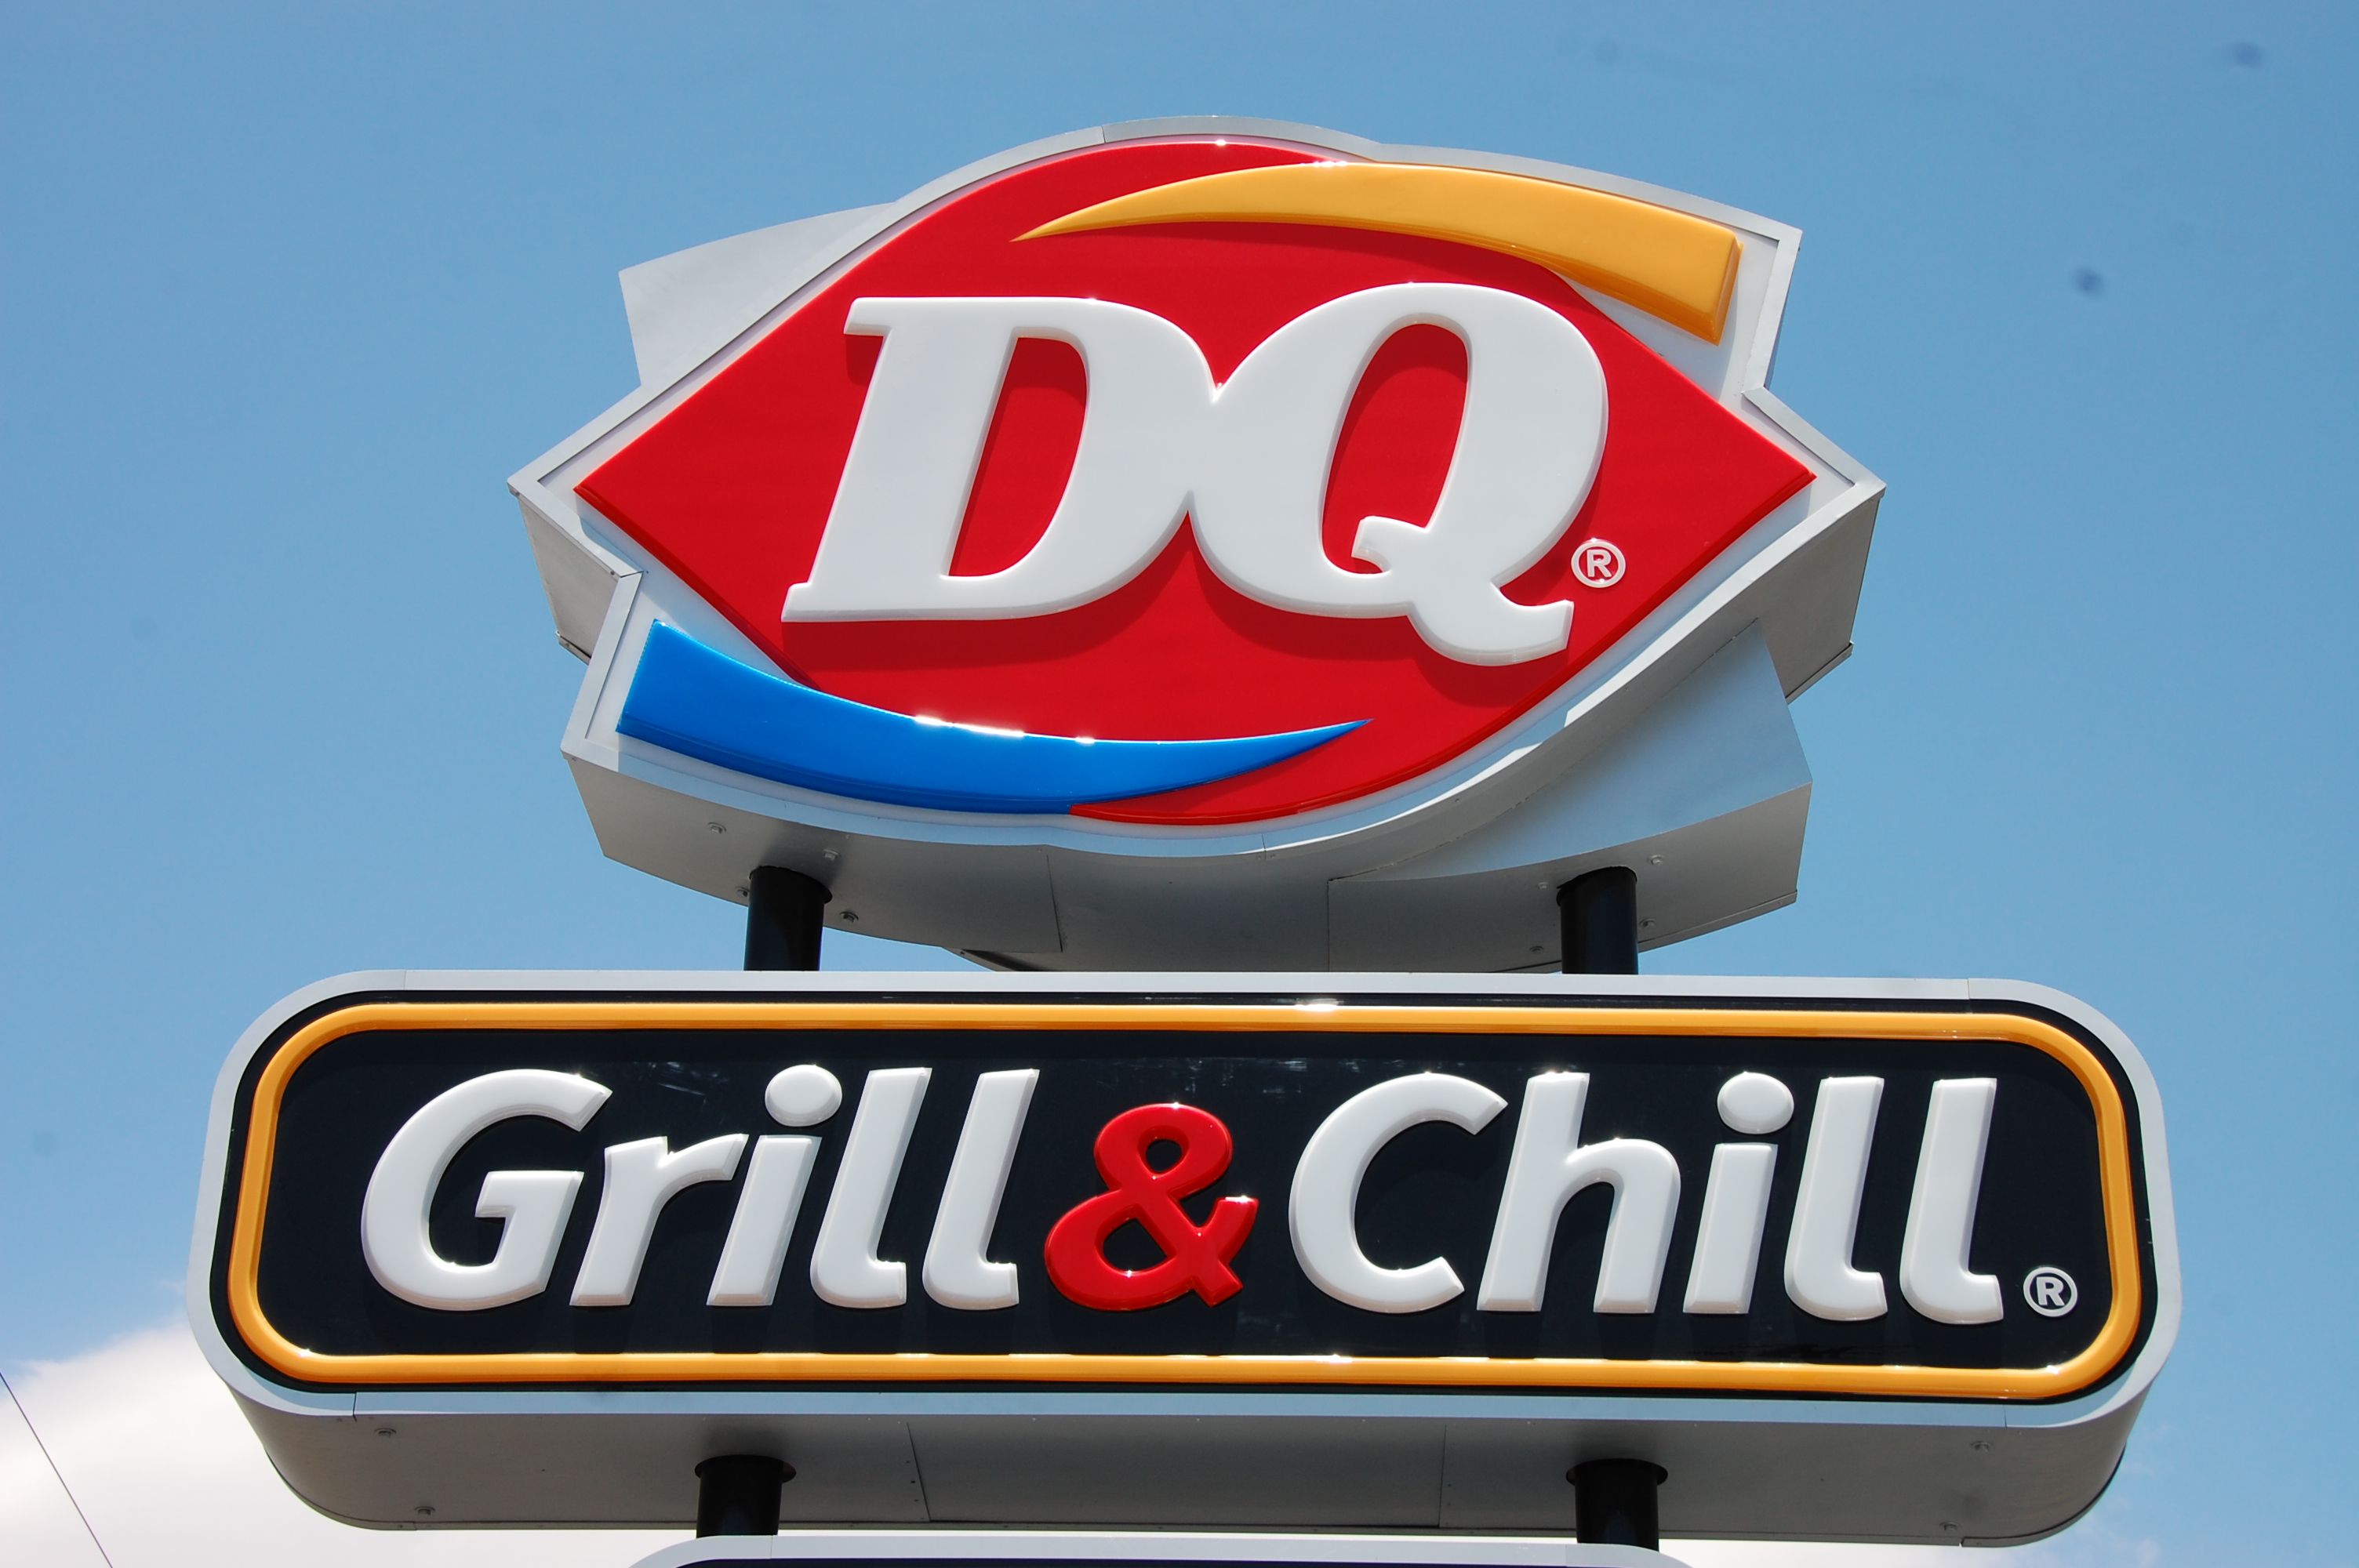 Dairy_Queen_Grill_&_Chill_sign